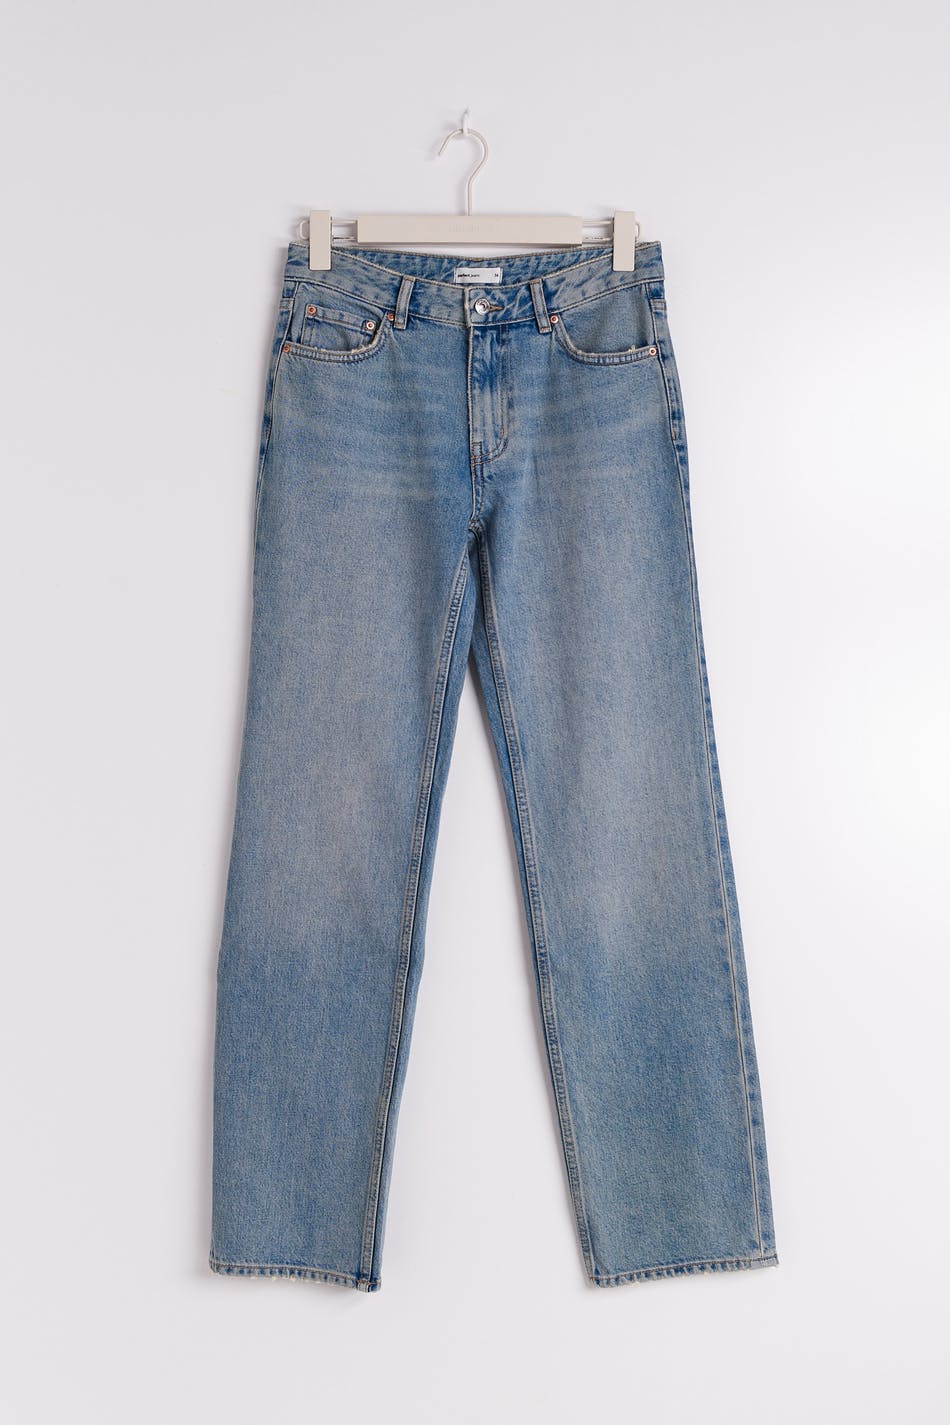  Gina Tricot- Low straight tall jeans - low waist jeans- Blue - 42- Female